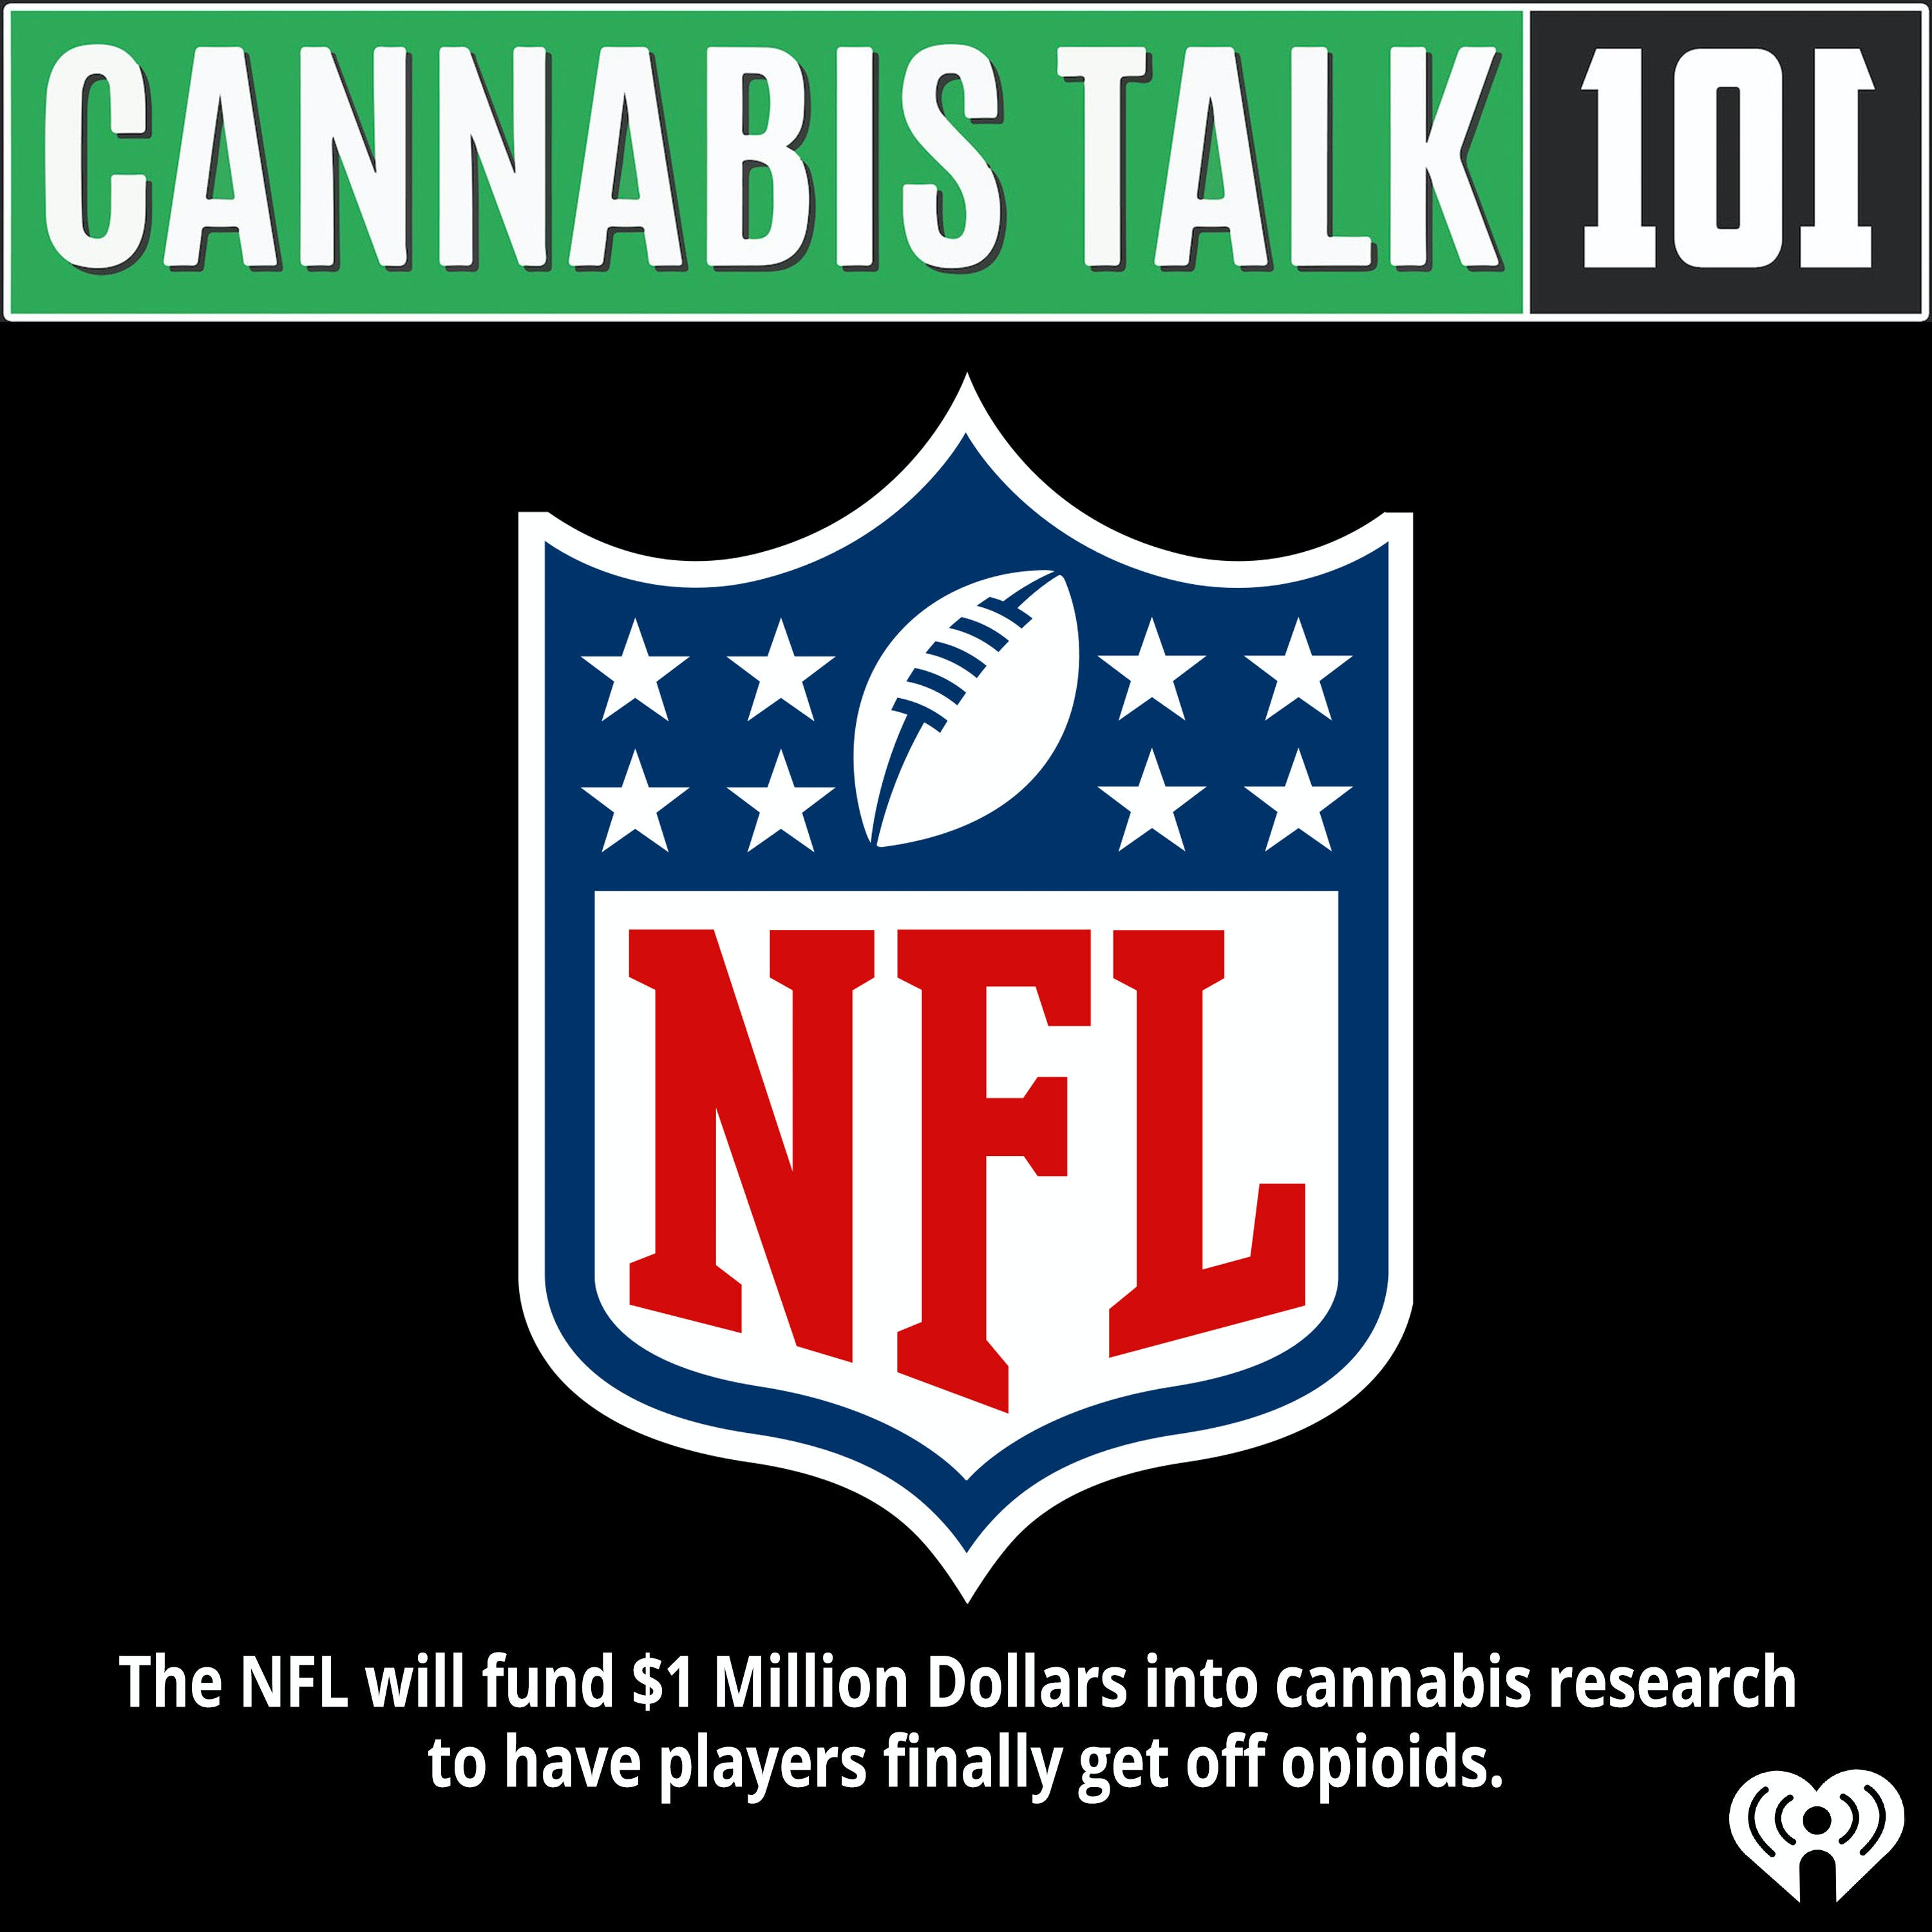 The NFL will fund $1 Million Dollars into cannabis research to have players finally get off opioids.